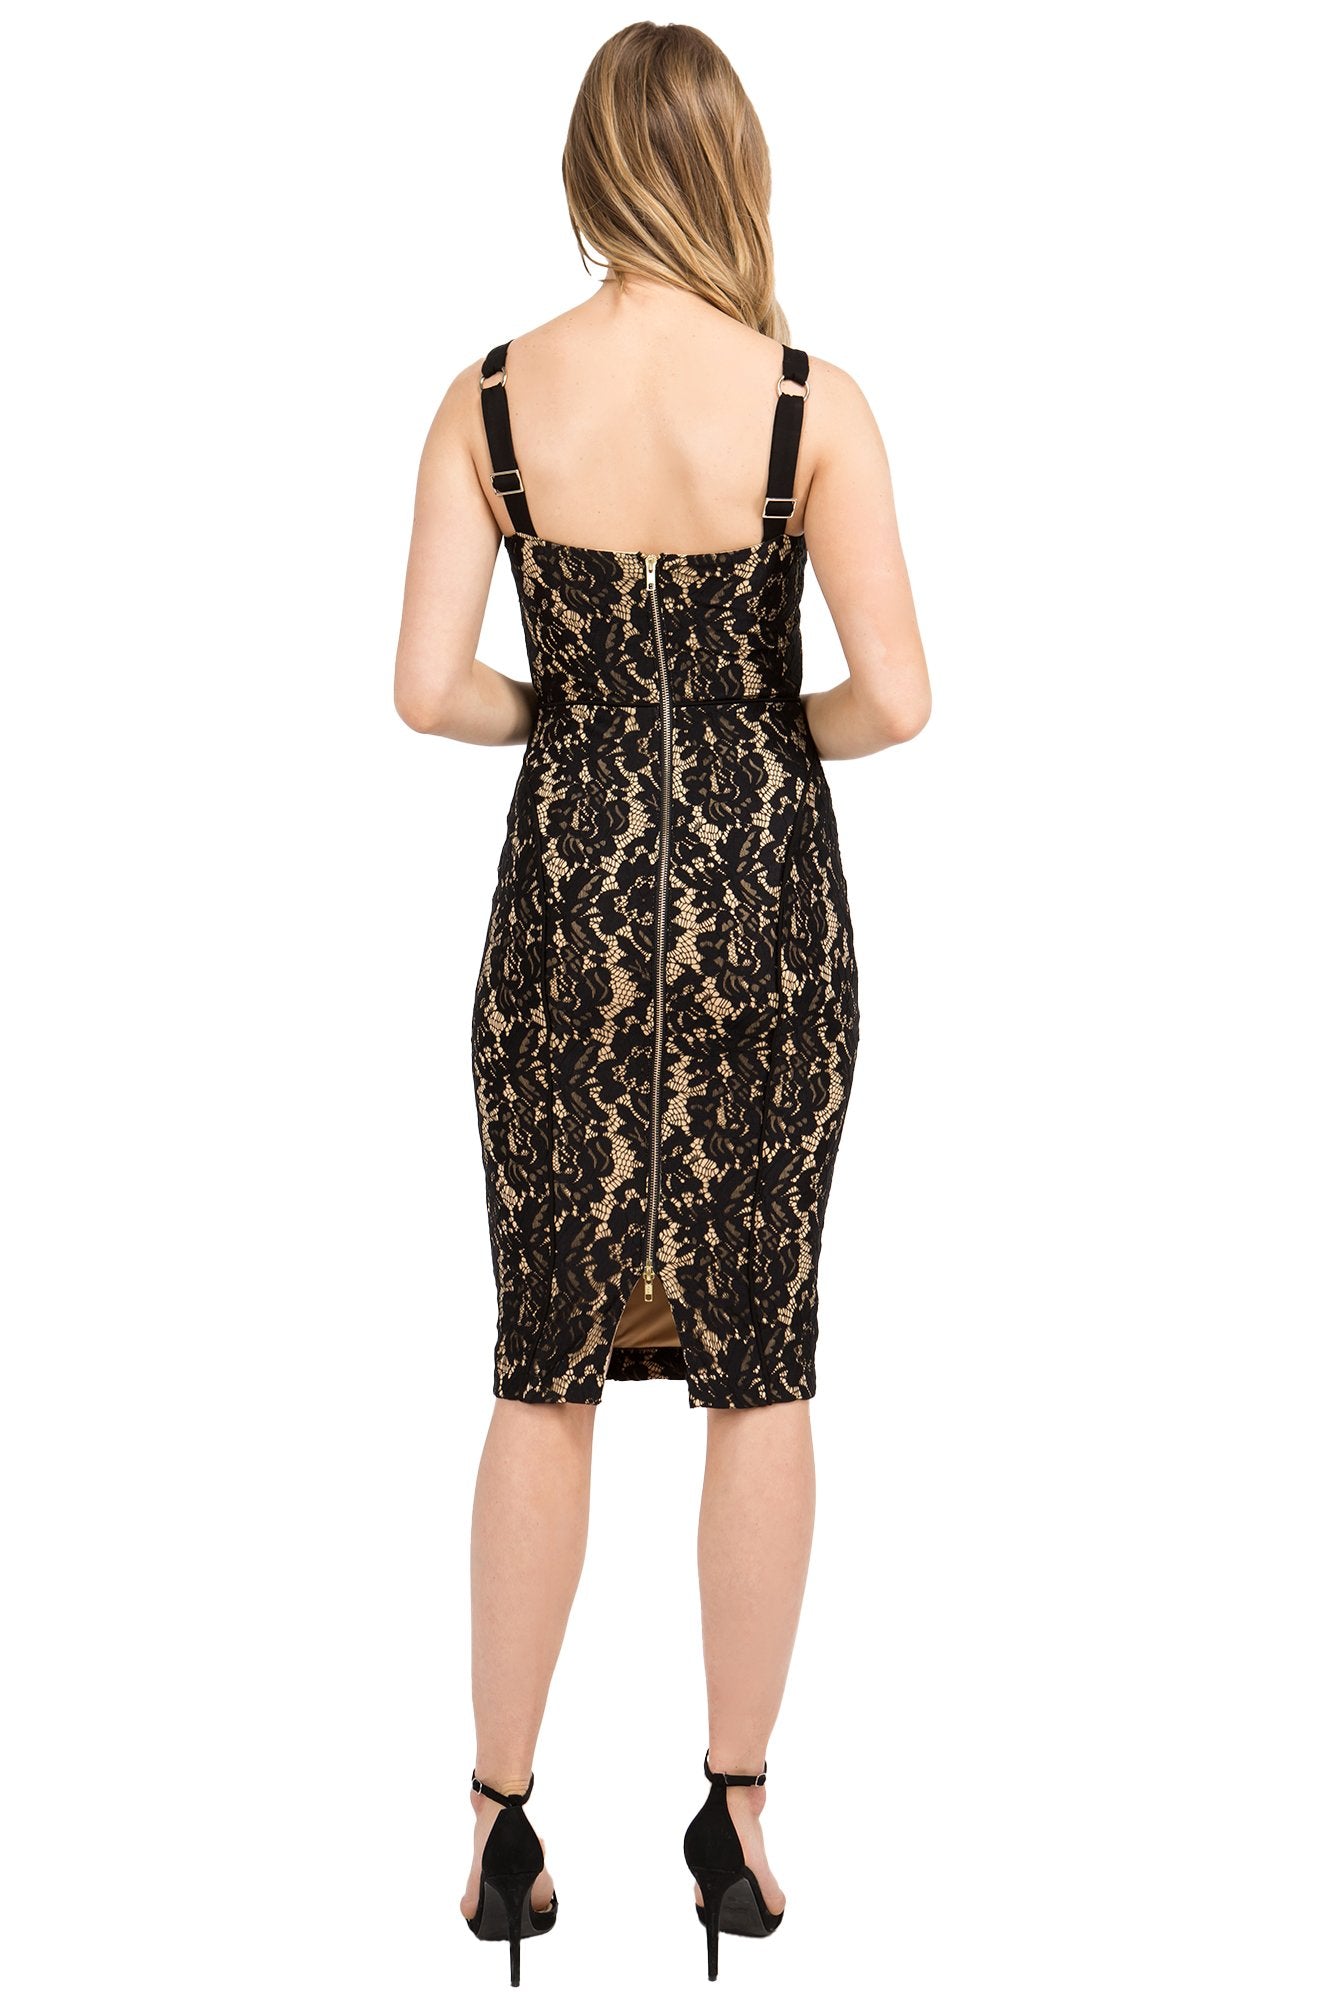 Back view of model wearing body-con midi black lace dress with adjustable straps and gold zipper down center back.